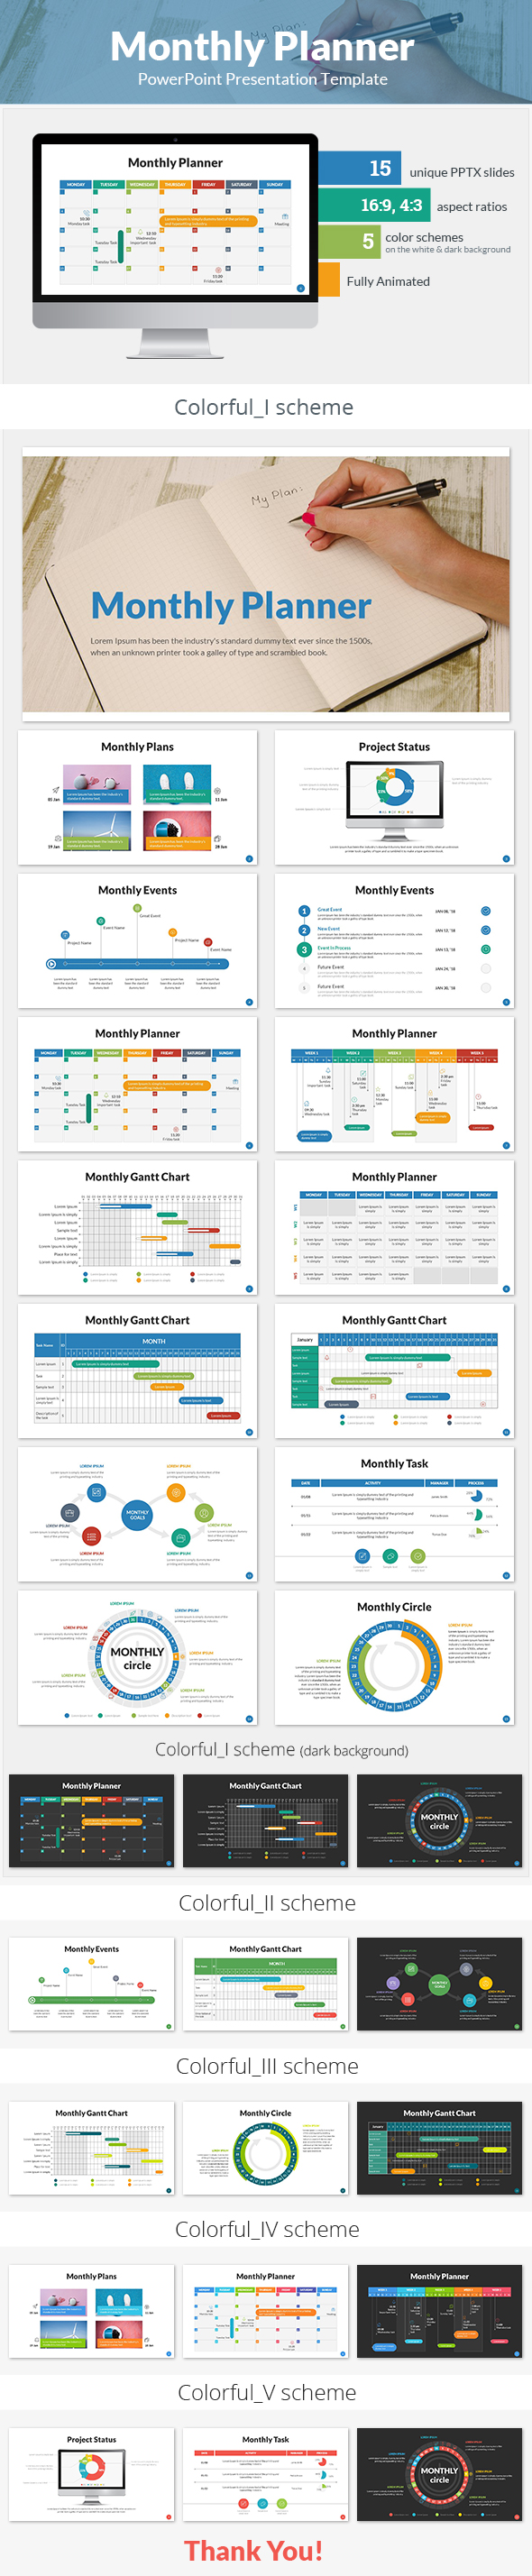 Monthly Planner PowerPoint Presentation Template